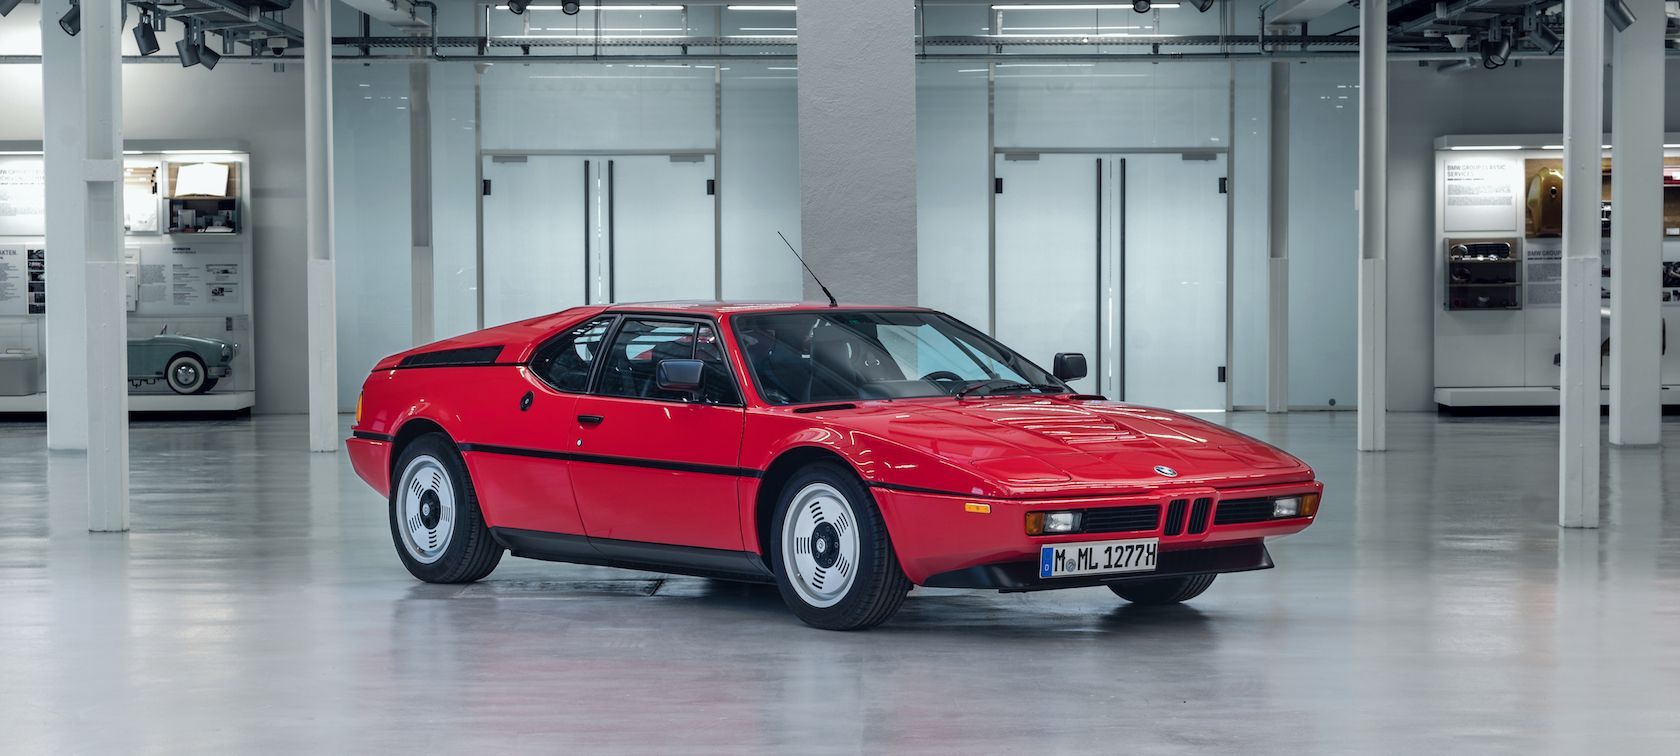 The BMW M1 sports car made for the streets. 